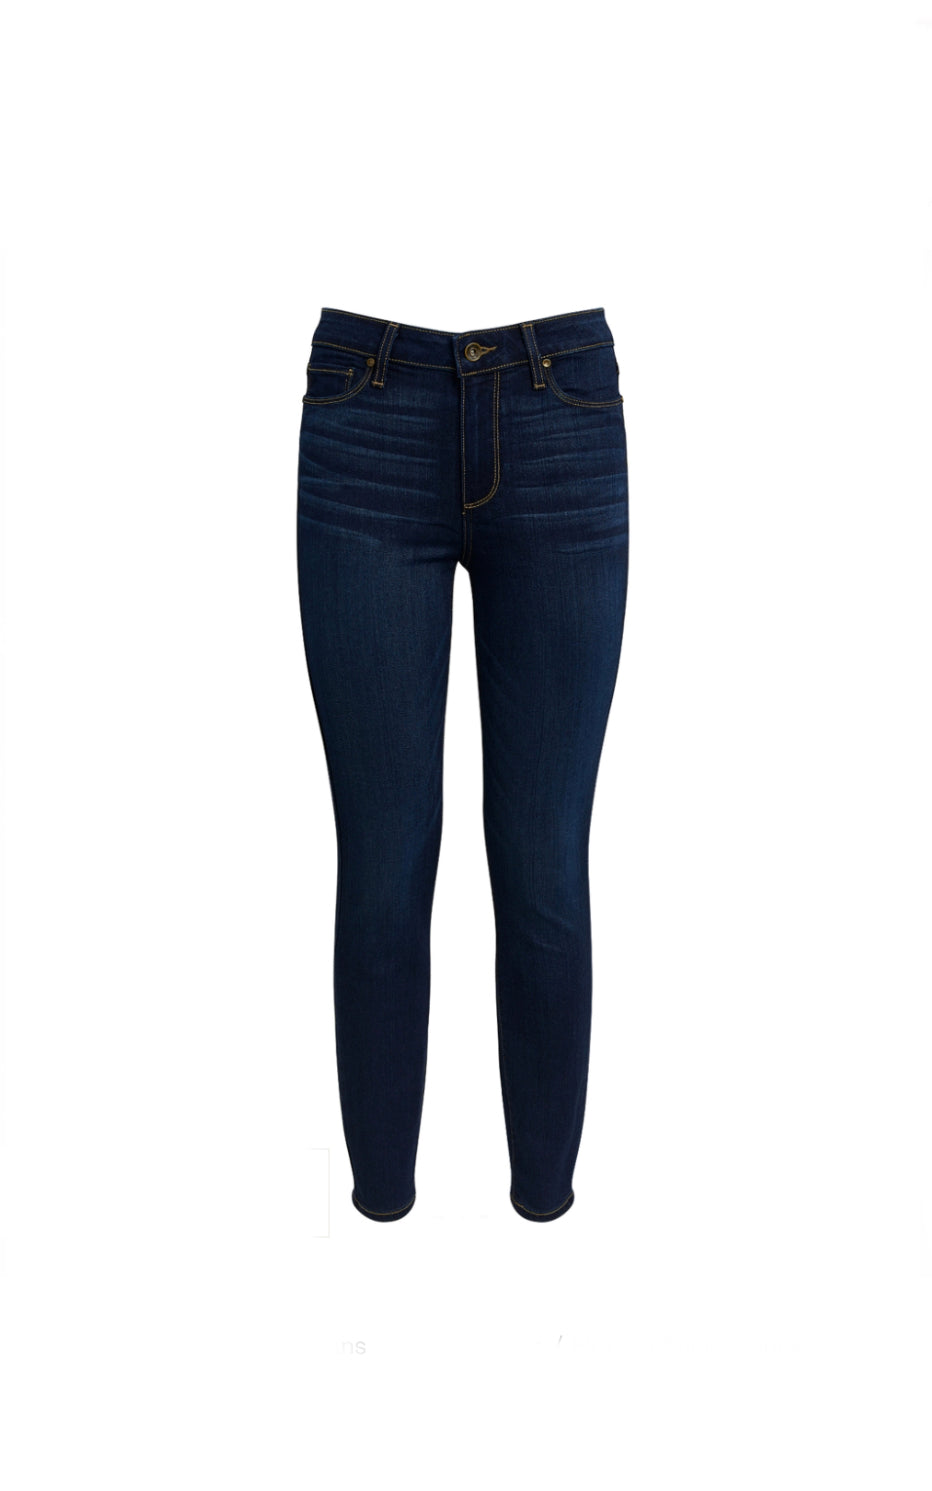 Paige Hoxton Ankle Jeans - nwt